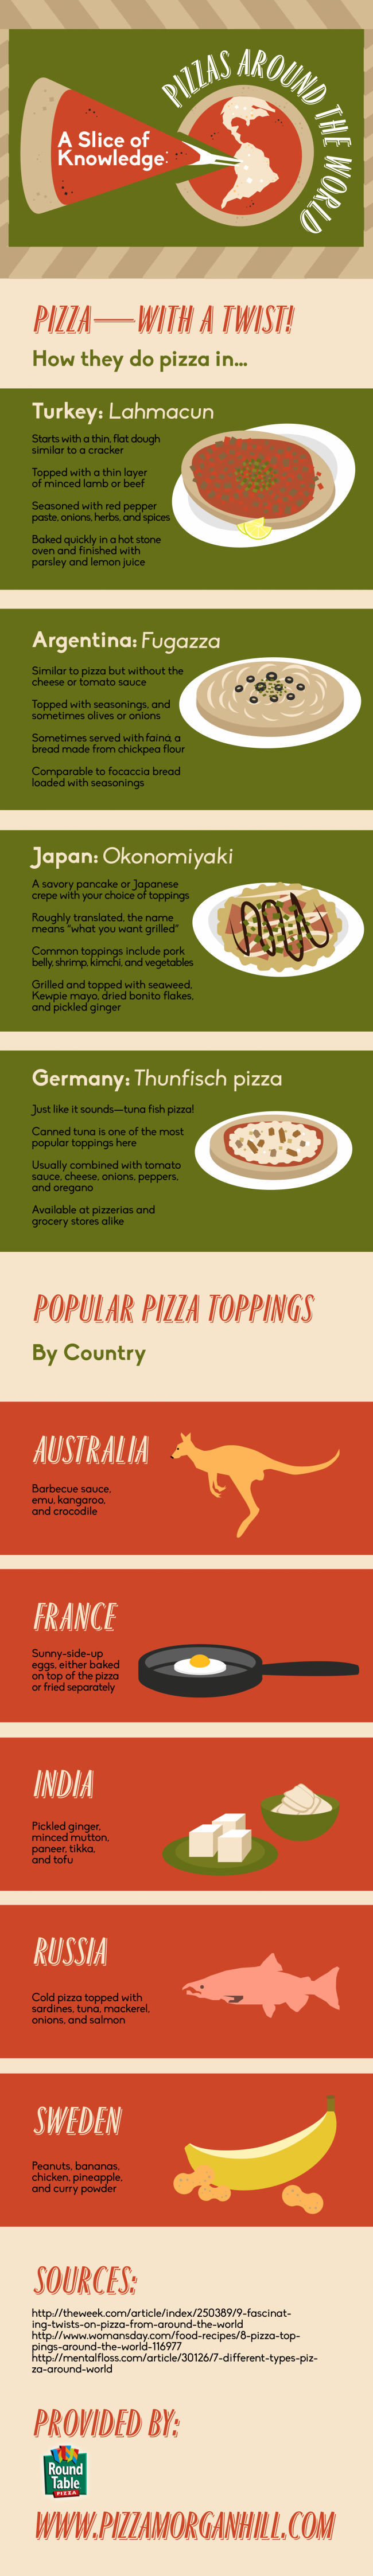 How pizza is consumed around the world